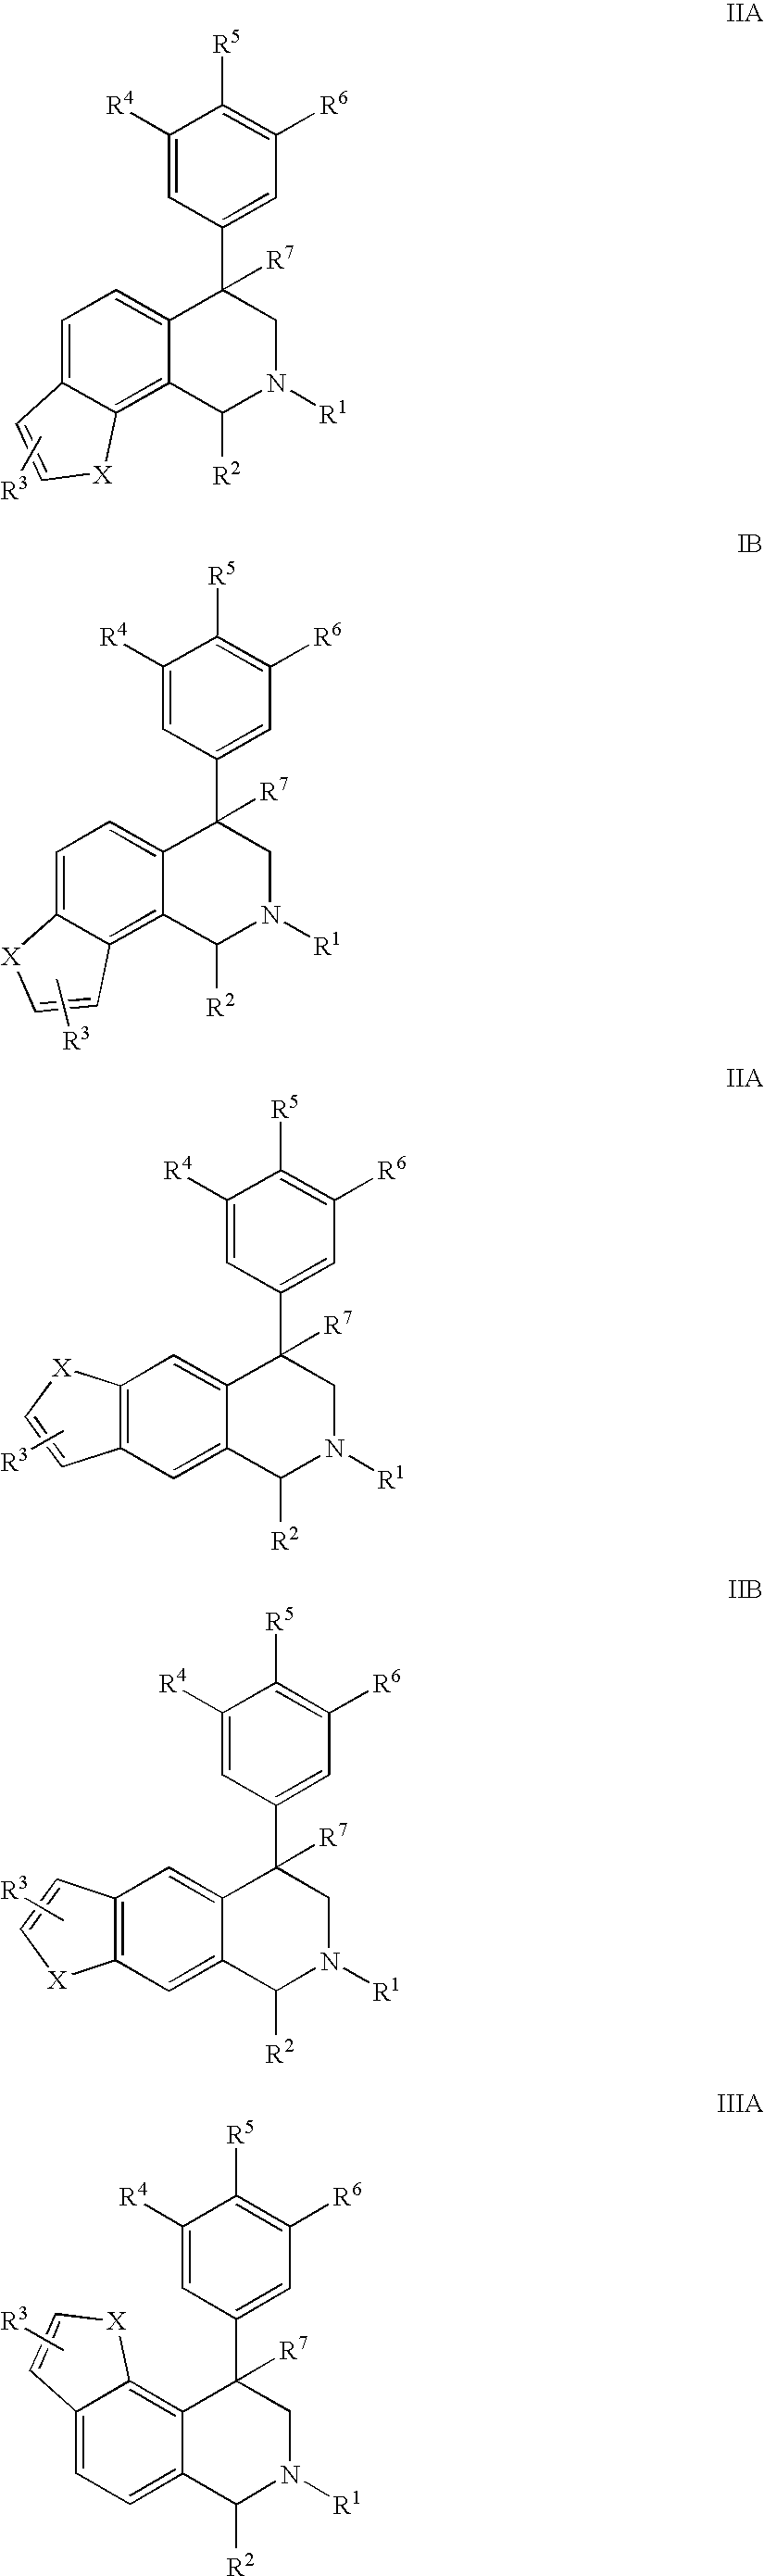 Novel 4-phenyl substituted tetrahydroisoquinolines and therapeutic use thereof